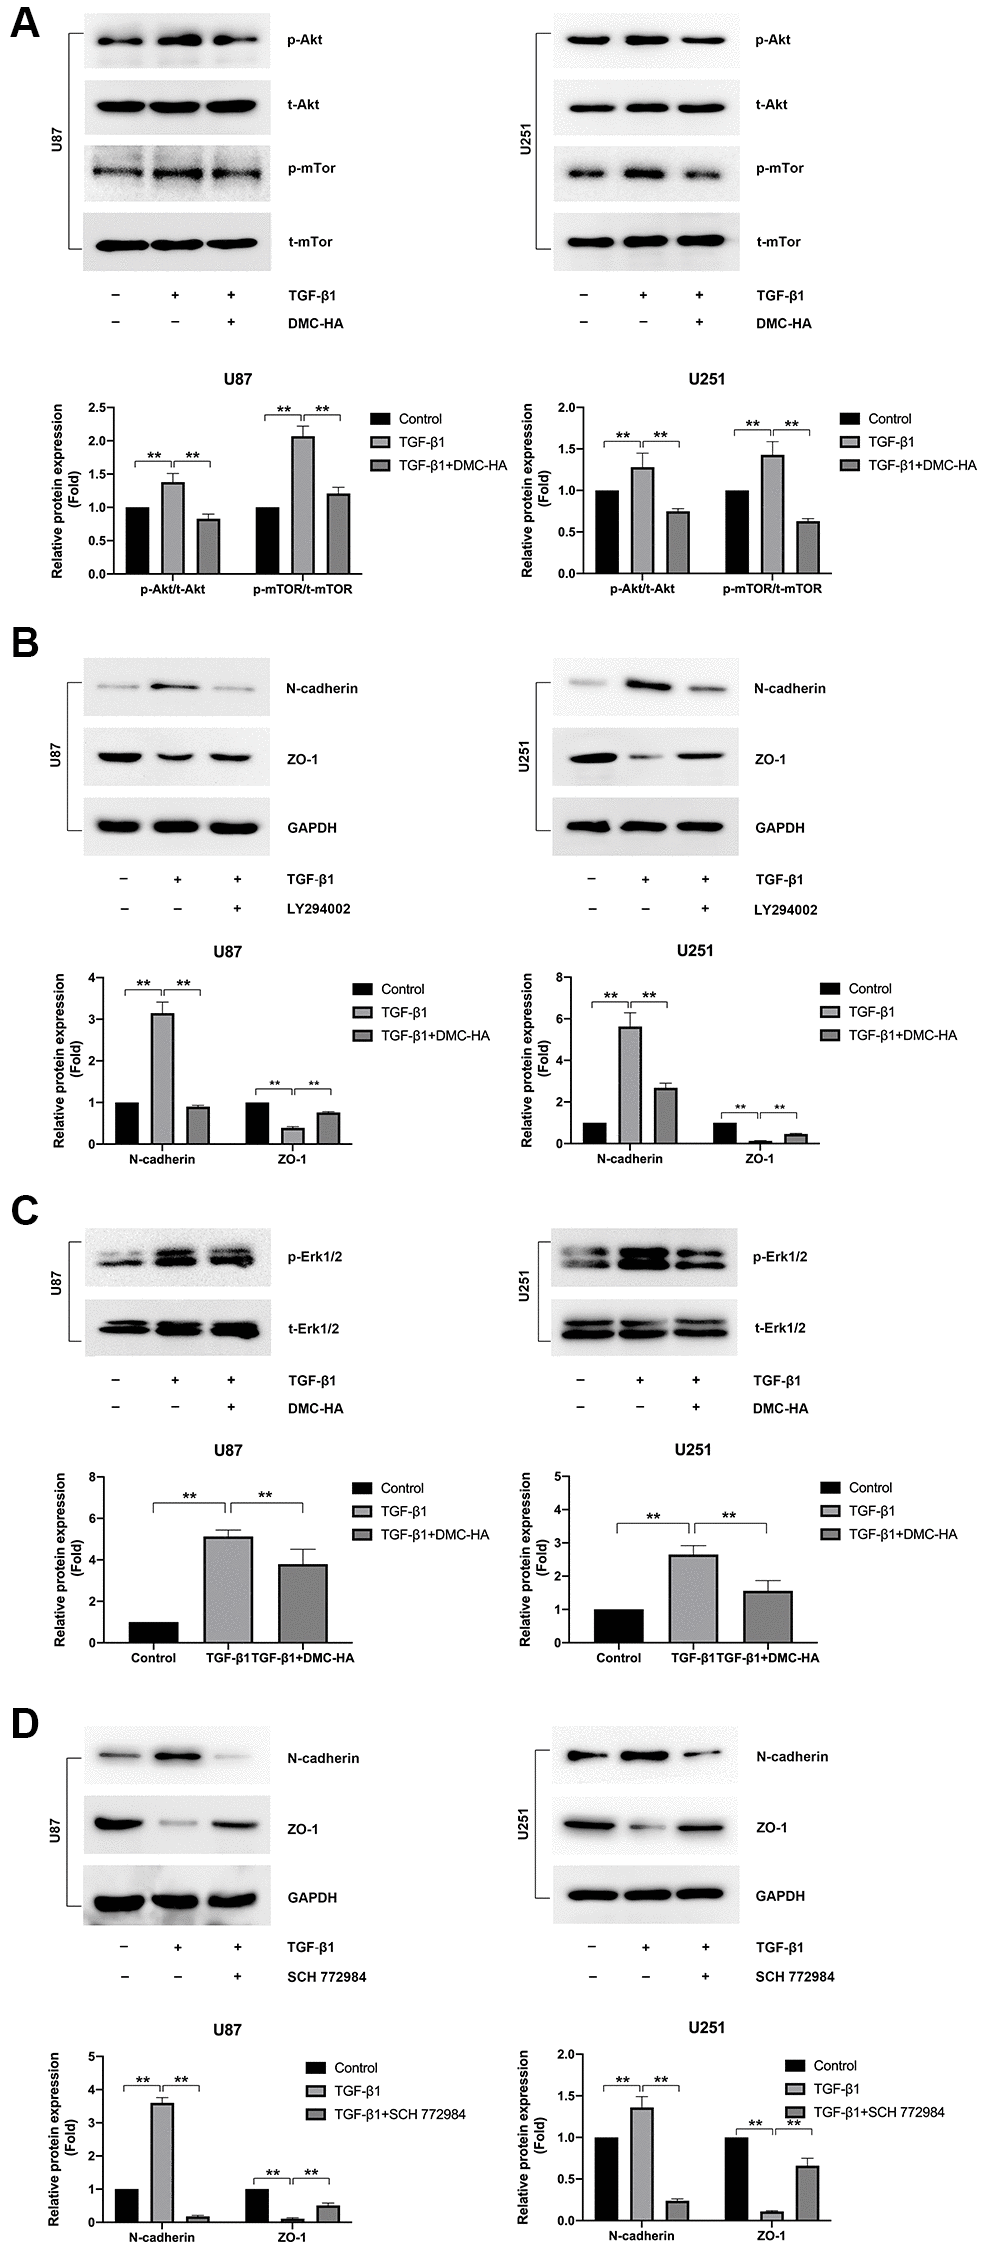 Effects of DMC-HA on the Akt and Erk signalling in glioma cells. (A) Western blot analysis was conducted to assess the expression of p-Akt and p-mTor following combined treatment with TGF-β1 and DMC-HA. (B) Western blot analysis was conducted to assess the expression of N-cadherin and ZO-1 following combined treatment with TGF-β1 and LY294002. (C) Western blot analysis was conducted to assess the expression of p-Erk1/2 following combined treatment with TGF-β1 and DMC-HA. (D) Western blot analysis was conducted to assess the expression of N-cadherin and ZO-1 following combined treatment with TGF-β1 and SCH 772984.